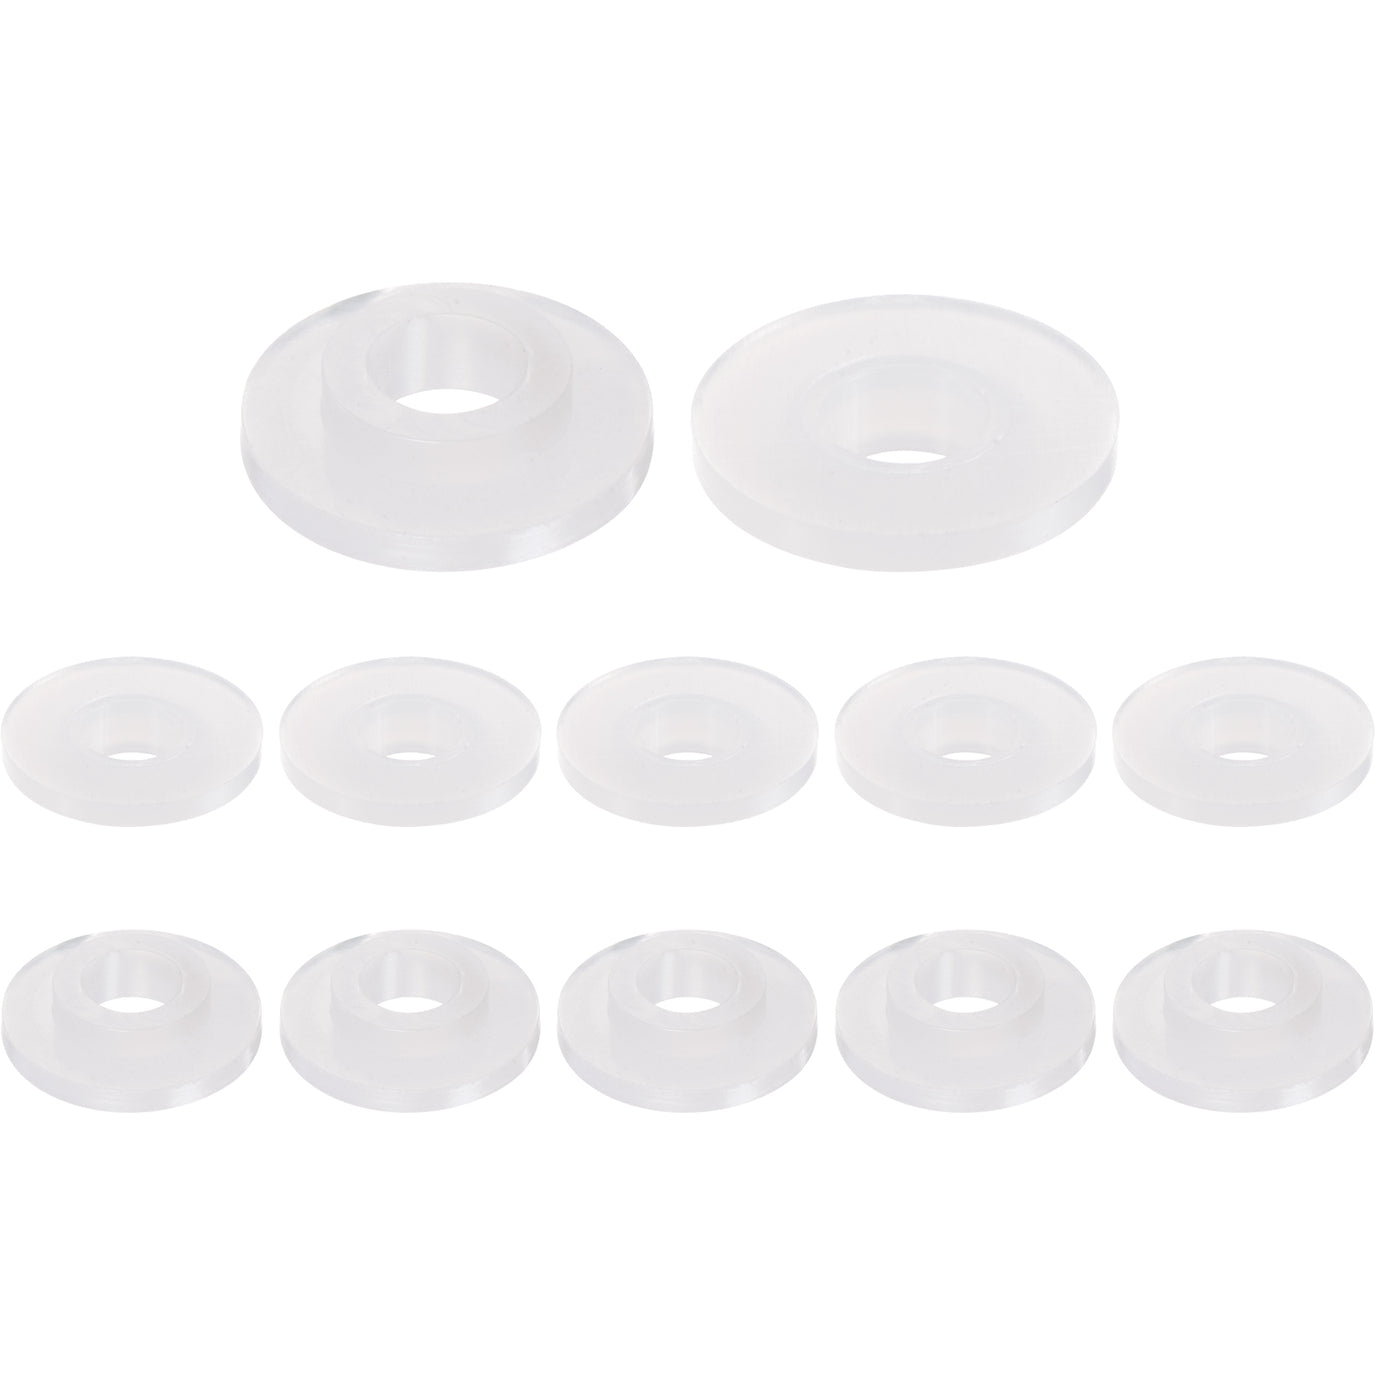 uxcell Uxcell 12pcs Flanged Sleeve Bearings 6.8mm ID 11mm OD 4.5mm Length Nylon Bushing, White